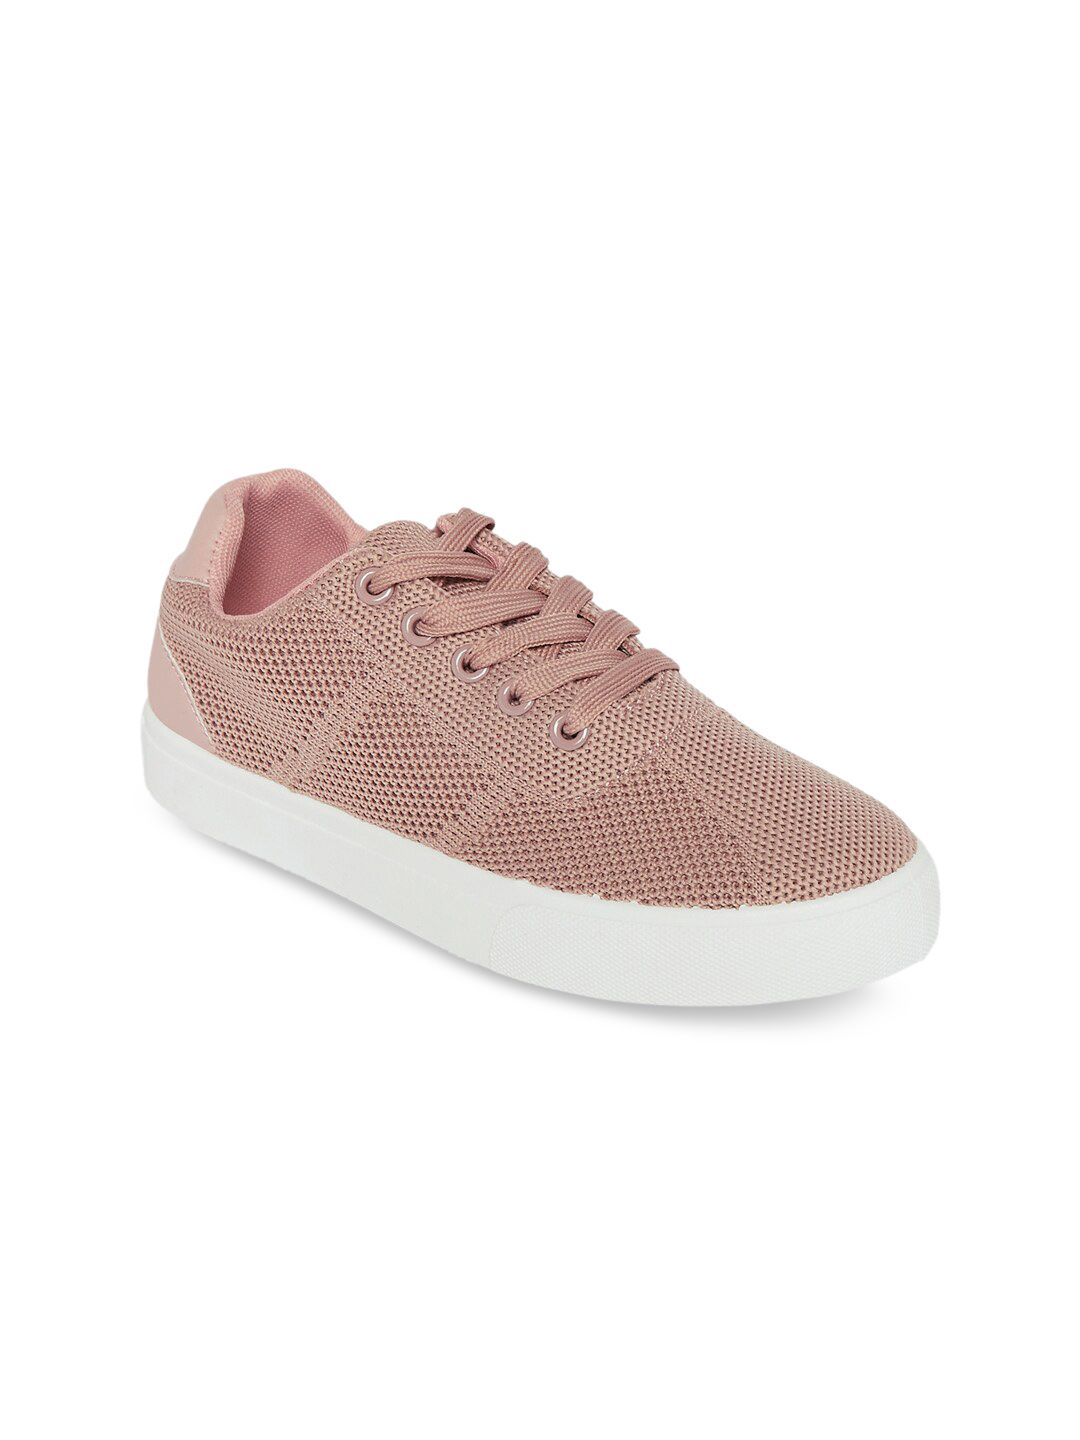 Forever Glam by Pantaloons Women Pink Woven Design Sneakers Price in India